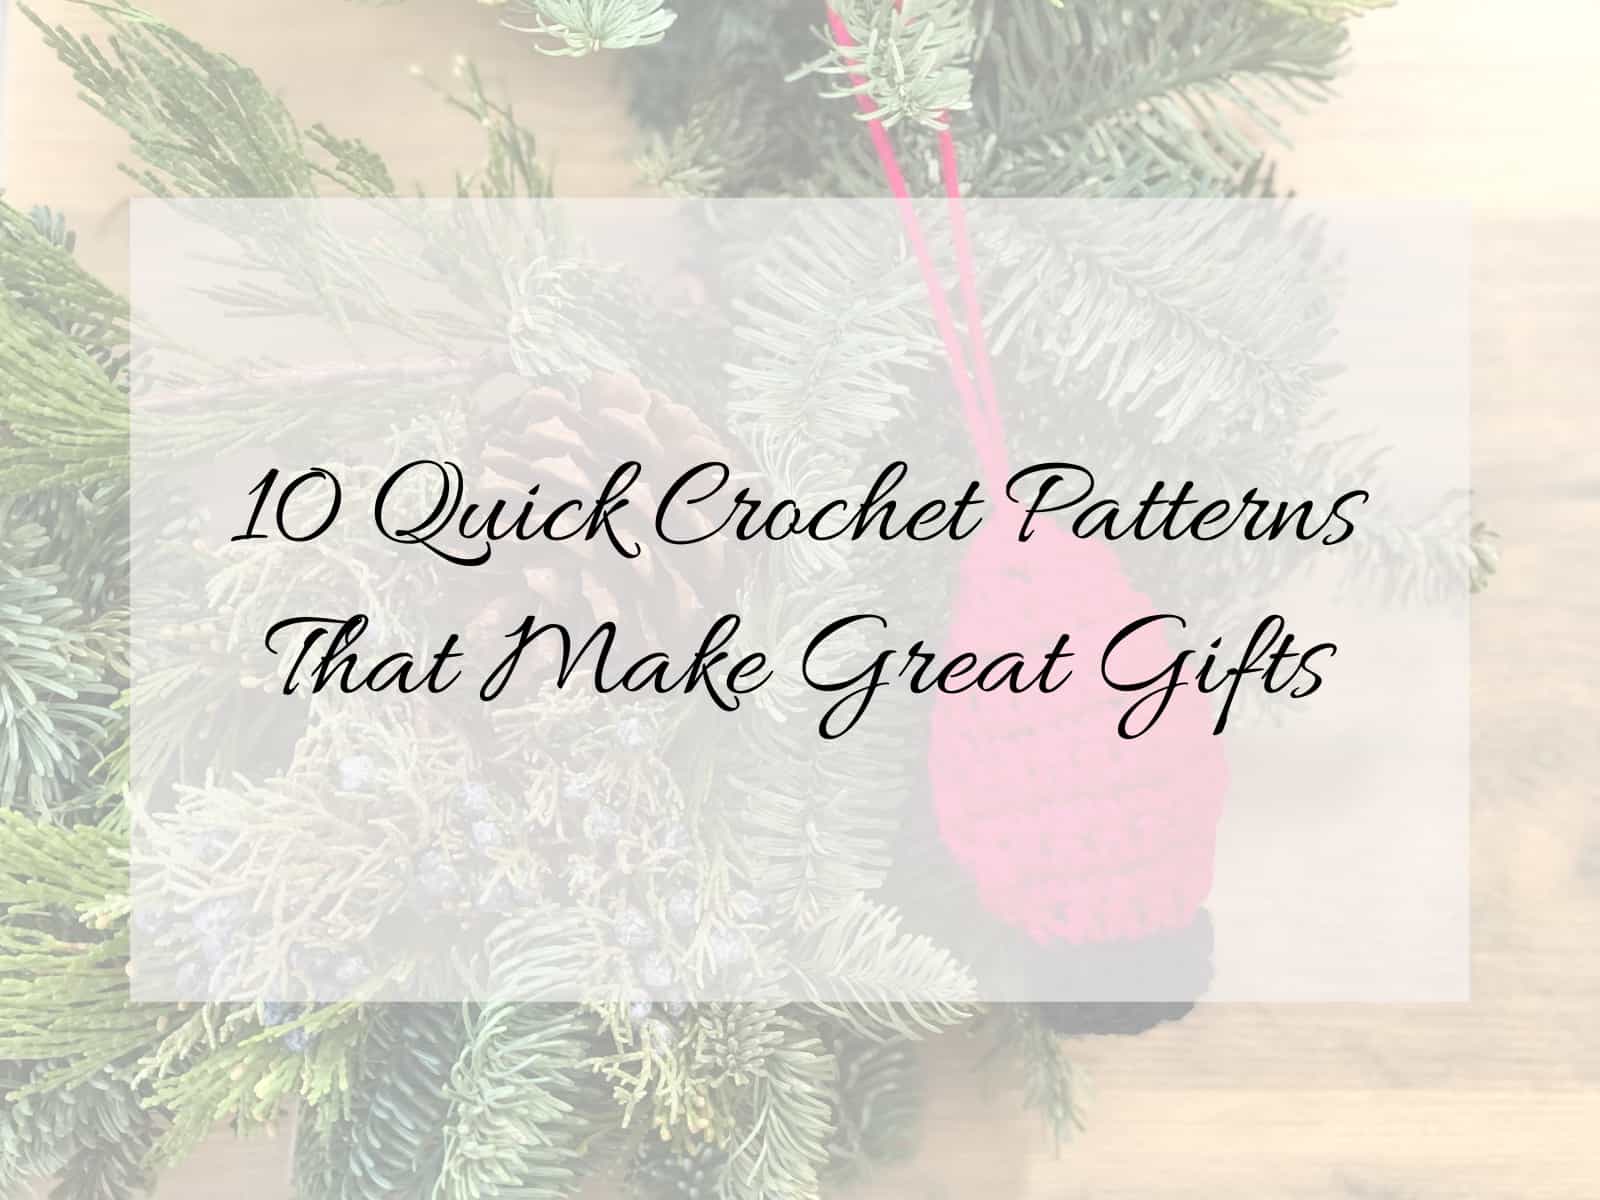 10 Quick Crochet Patterns That Make Great Gifts